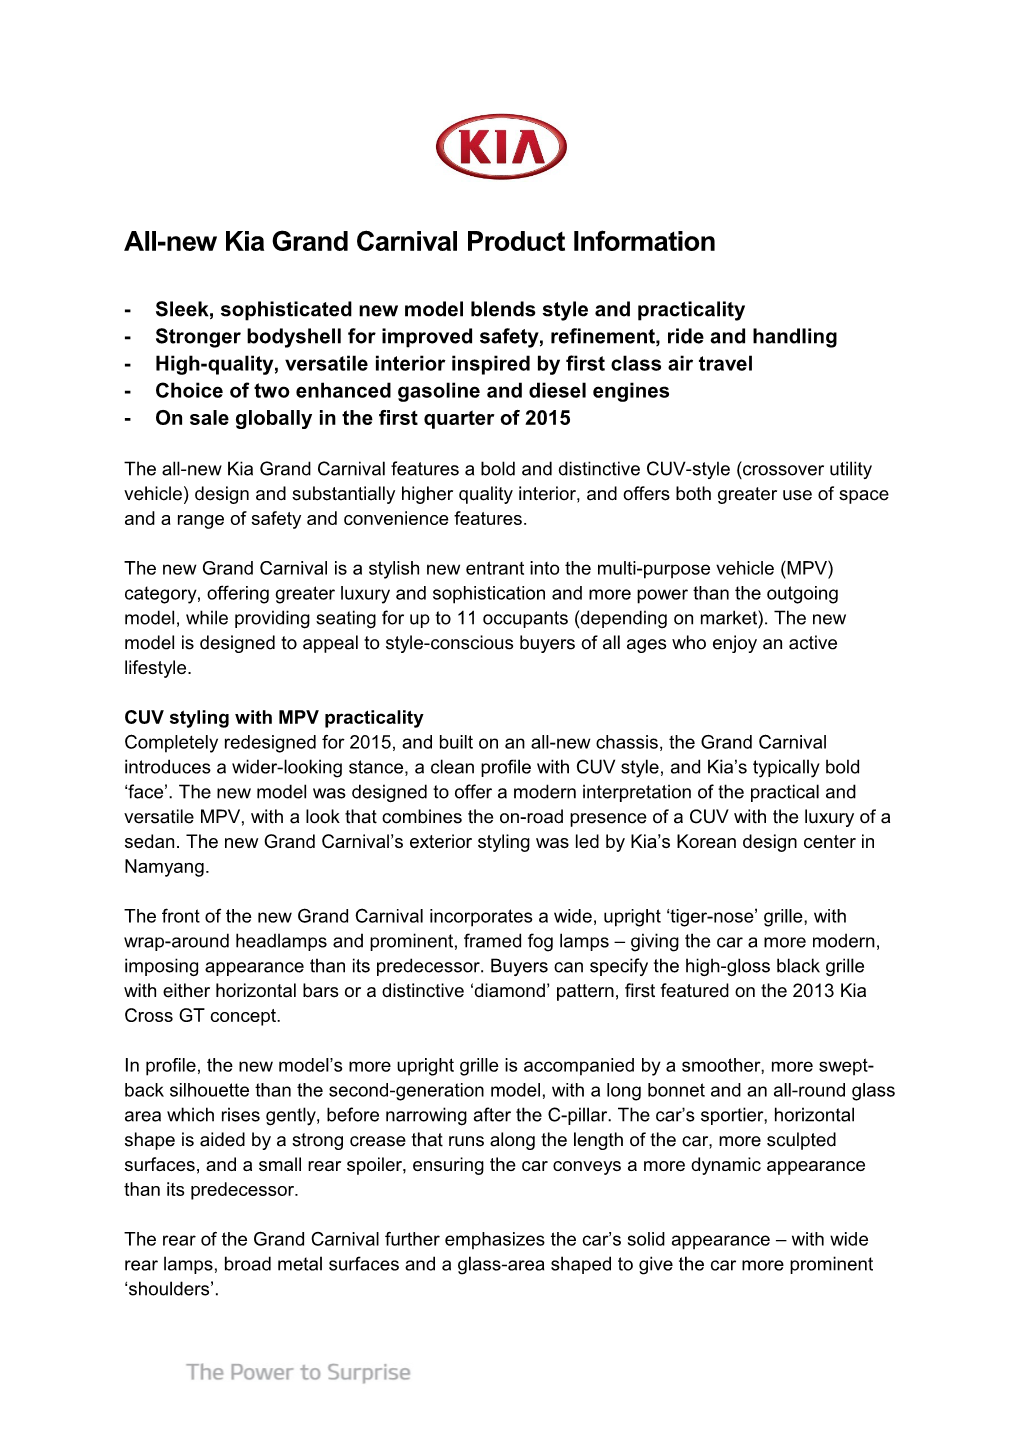 All-New Kia Grand Carnival Product Information